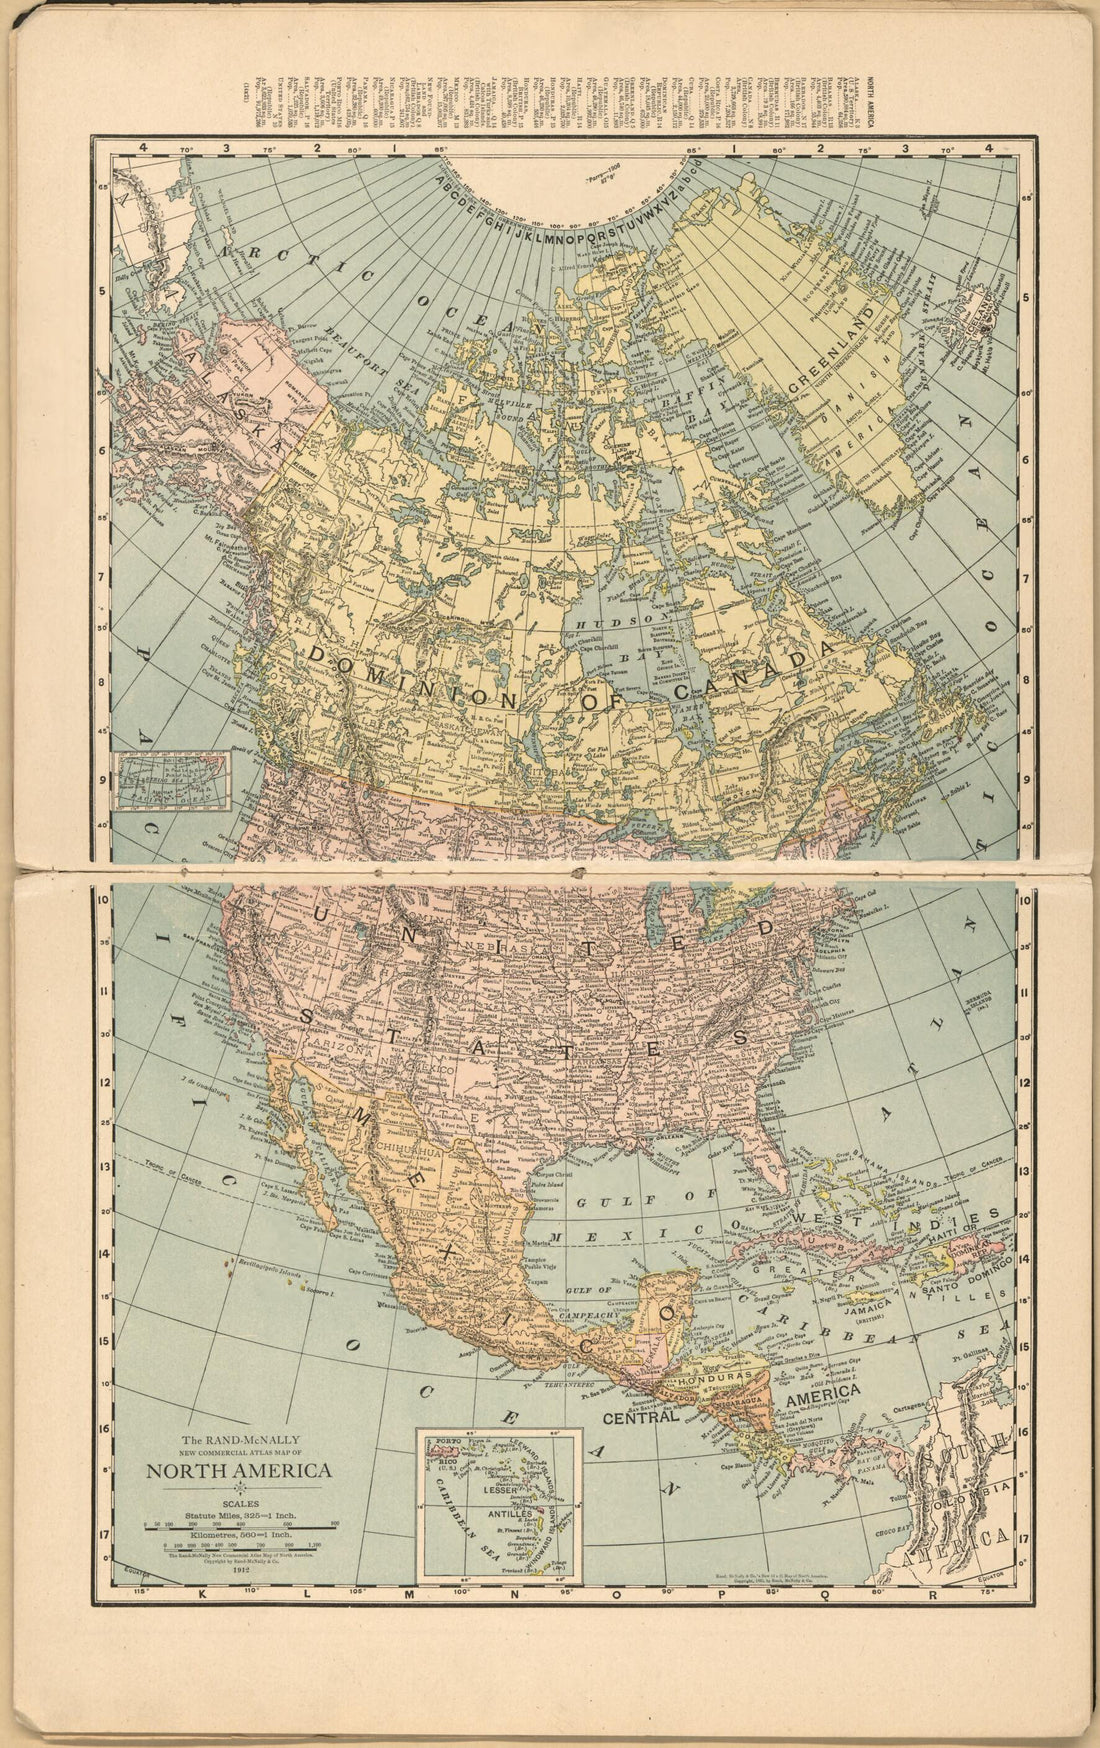 This old map of North America: 1912 from Mexican Revolution from 1913 was created by  Rand McNally and Company in 1913